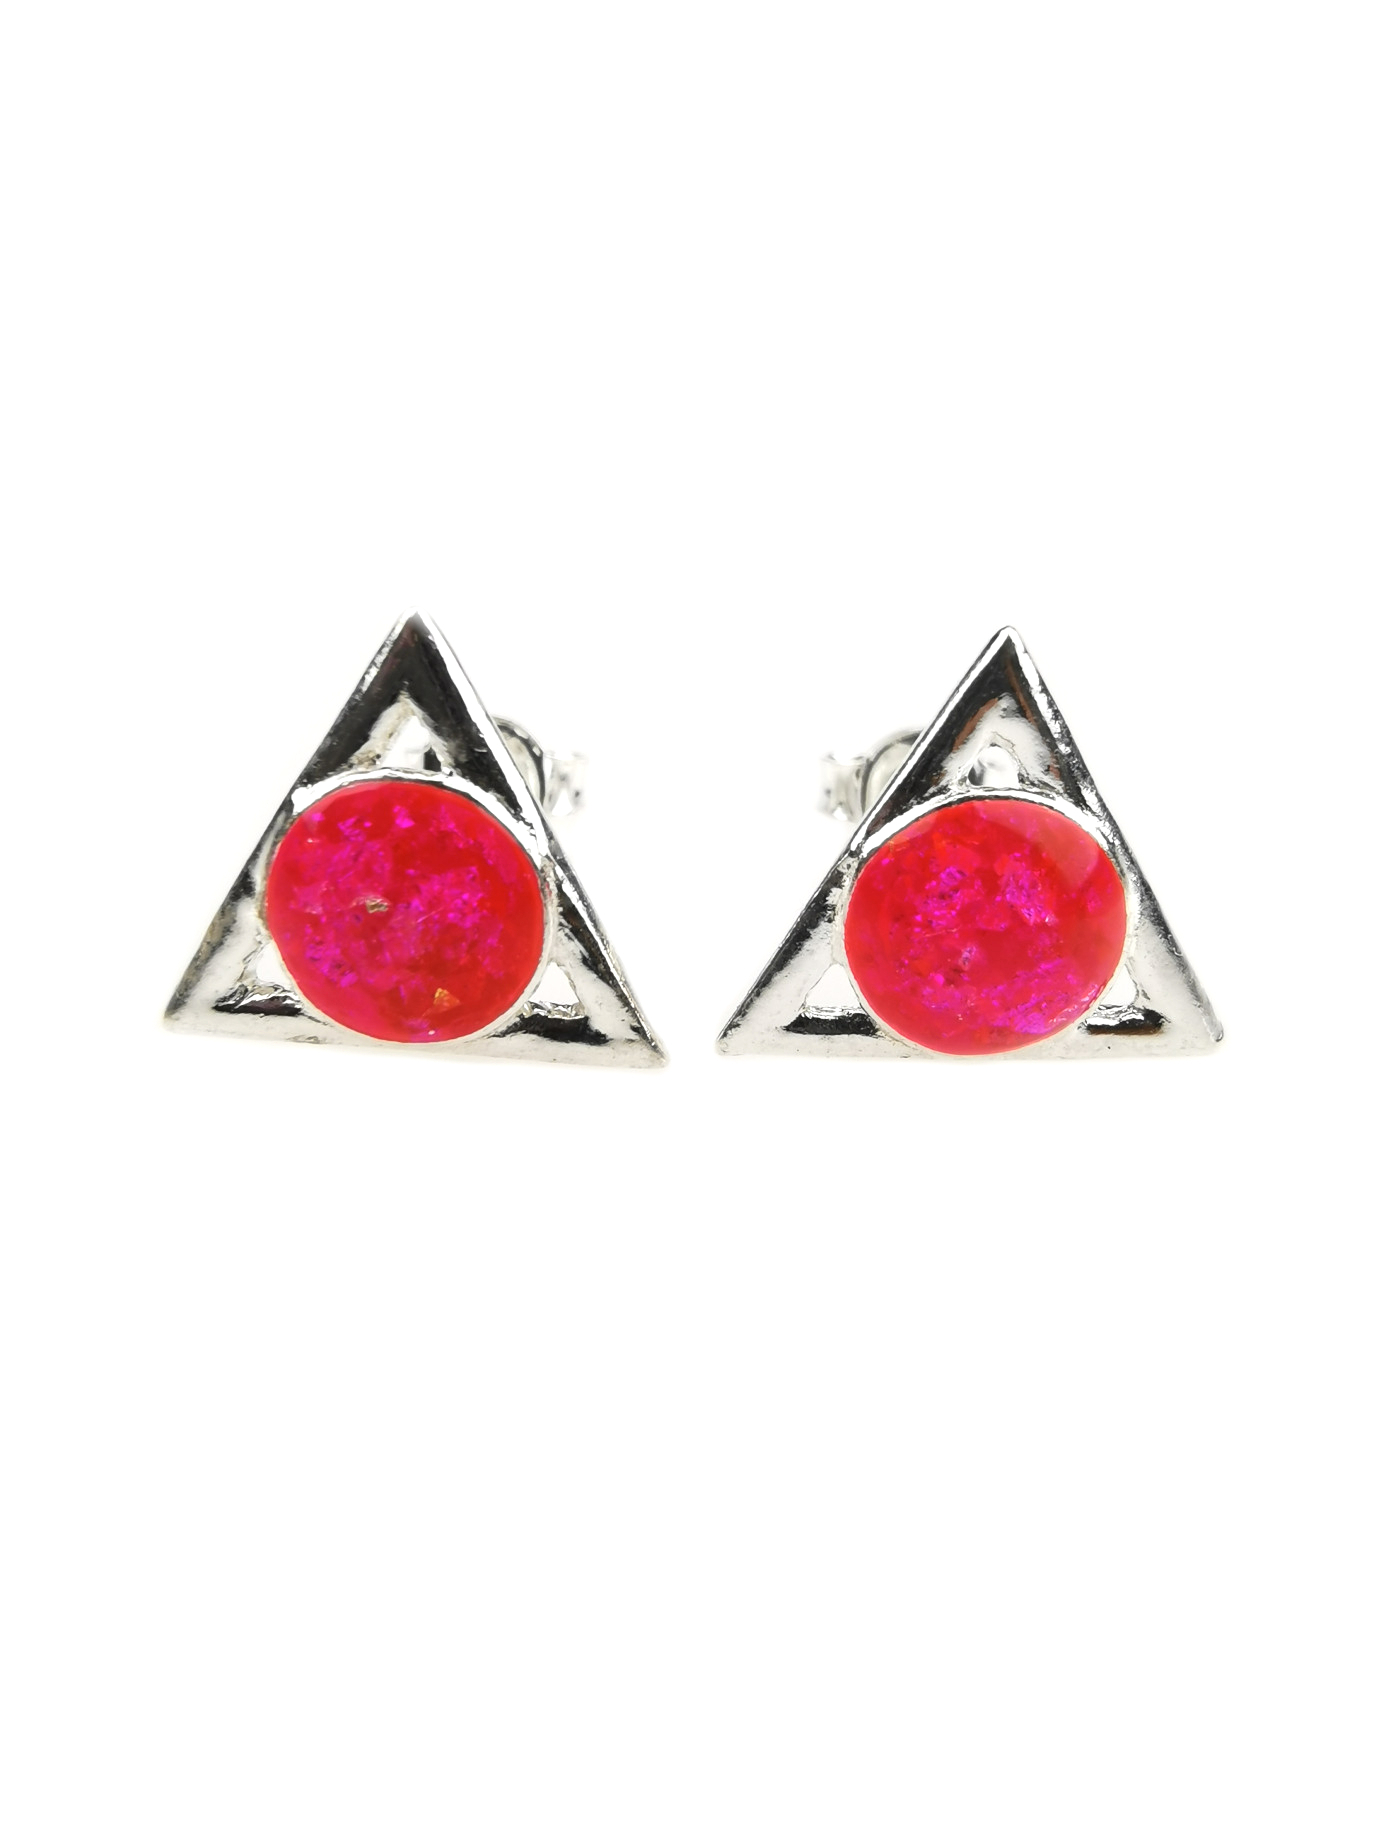 Pink Triangle Orgone Energy Earrings by OrgoneVibes